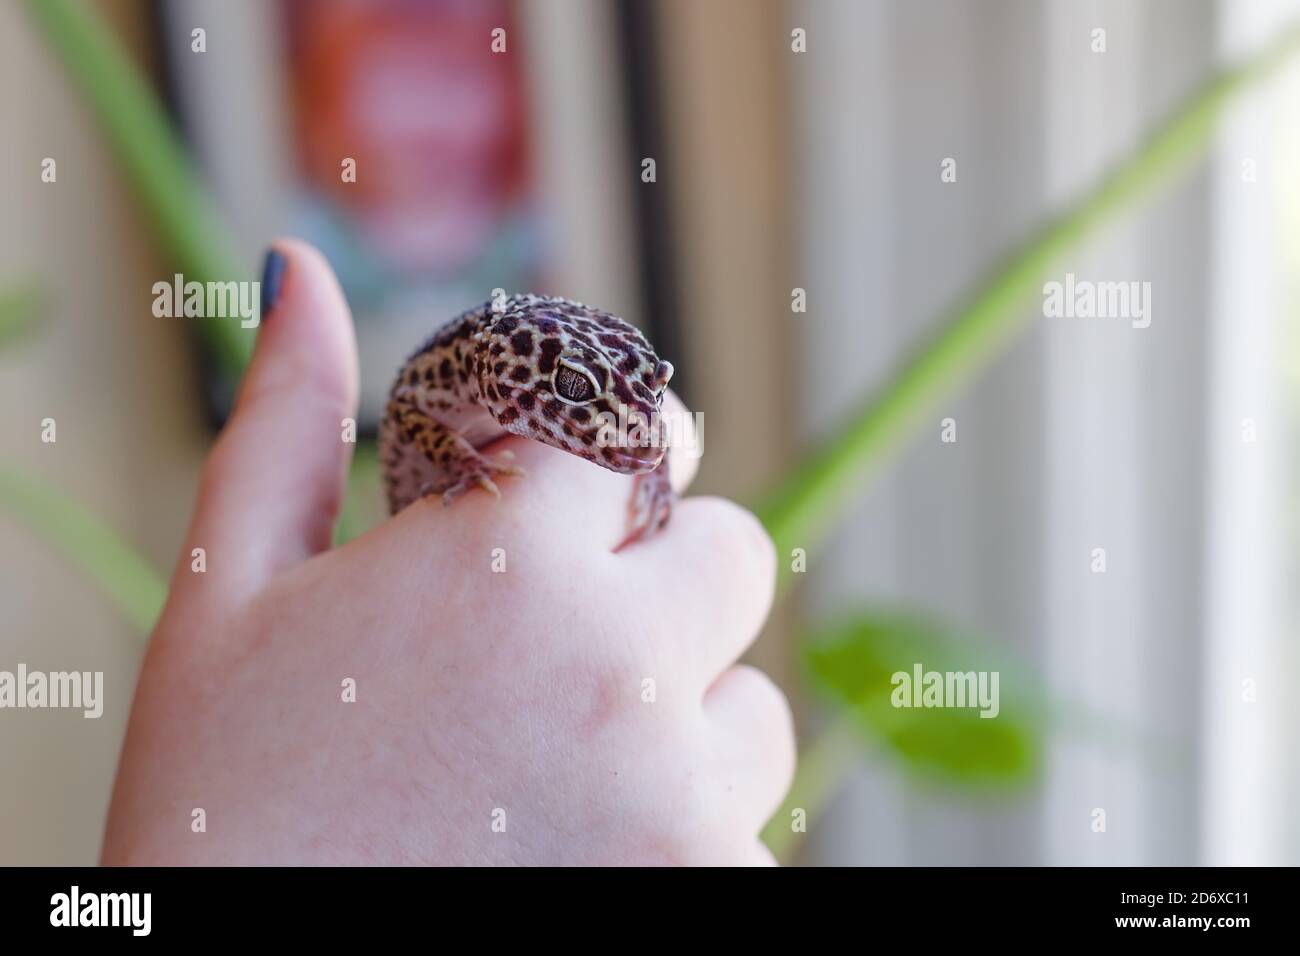 Female hand holding a pet leopard gecko Stock Photo